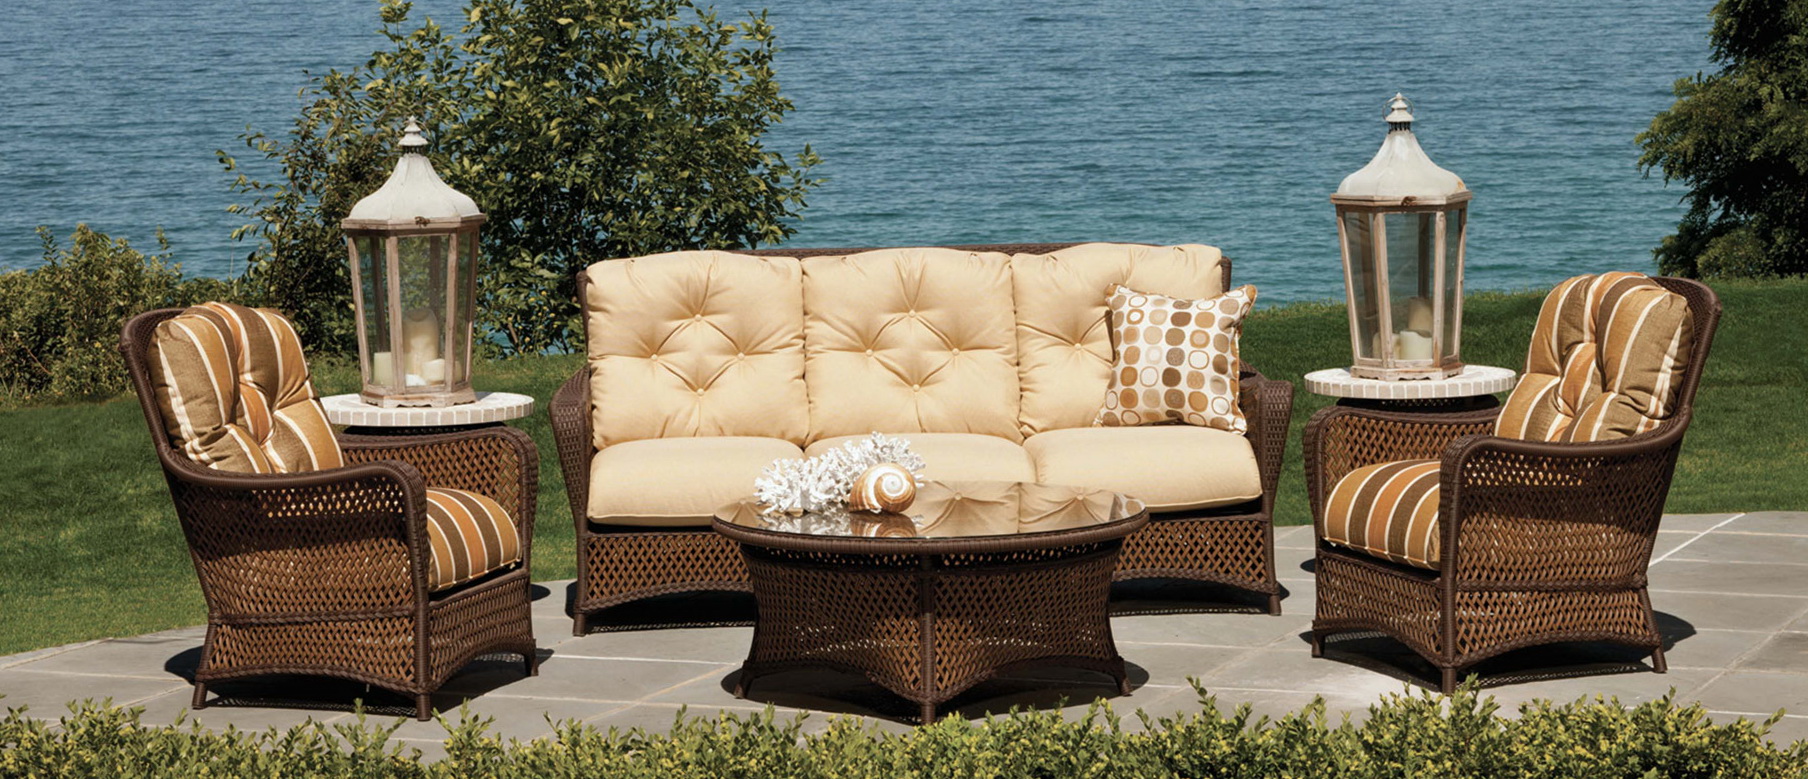 Outdoor Furniture Replacement Cushions Adelaide Home 